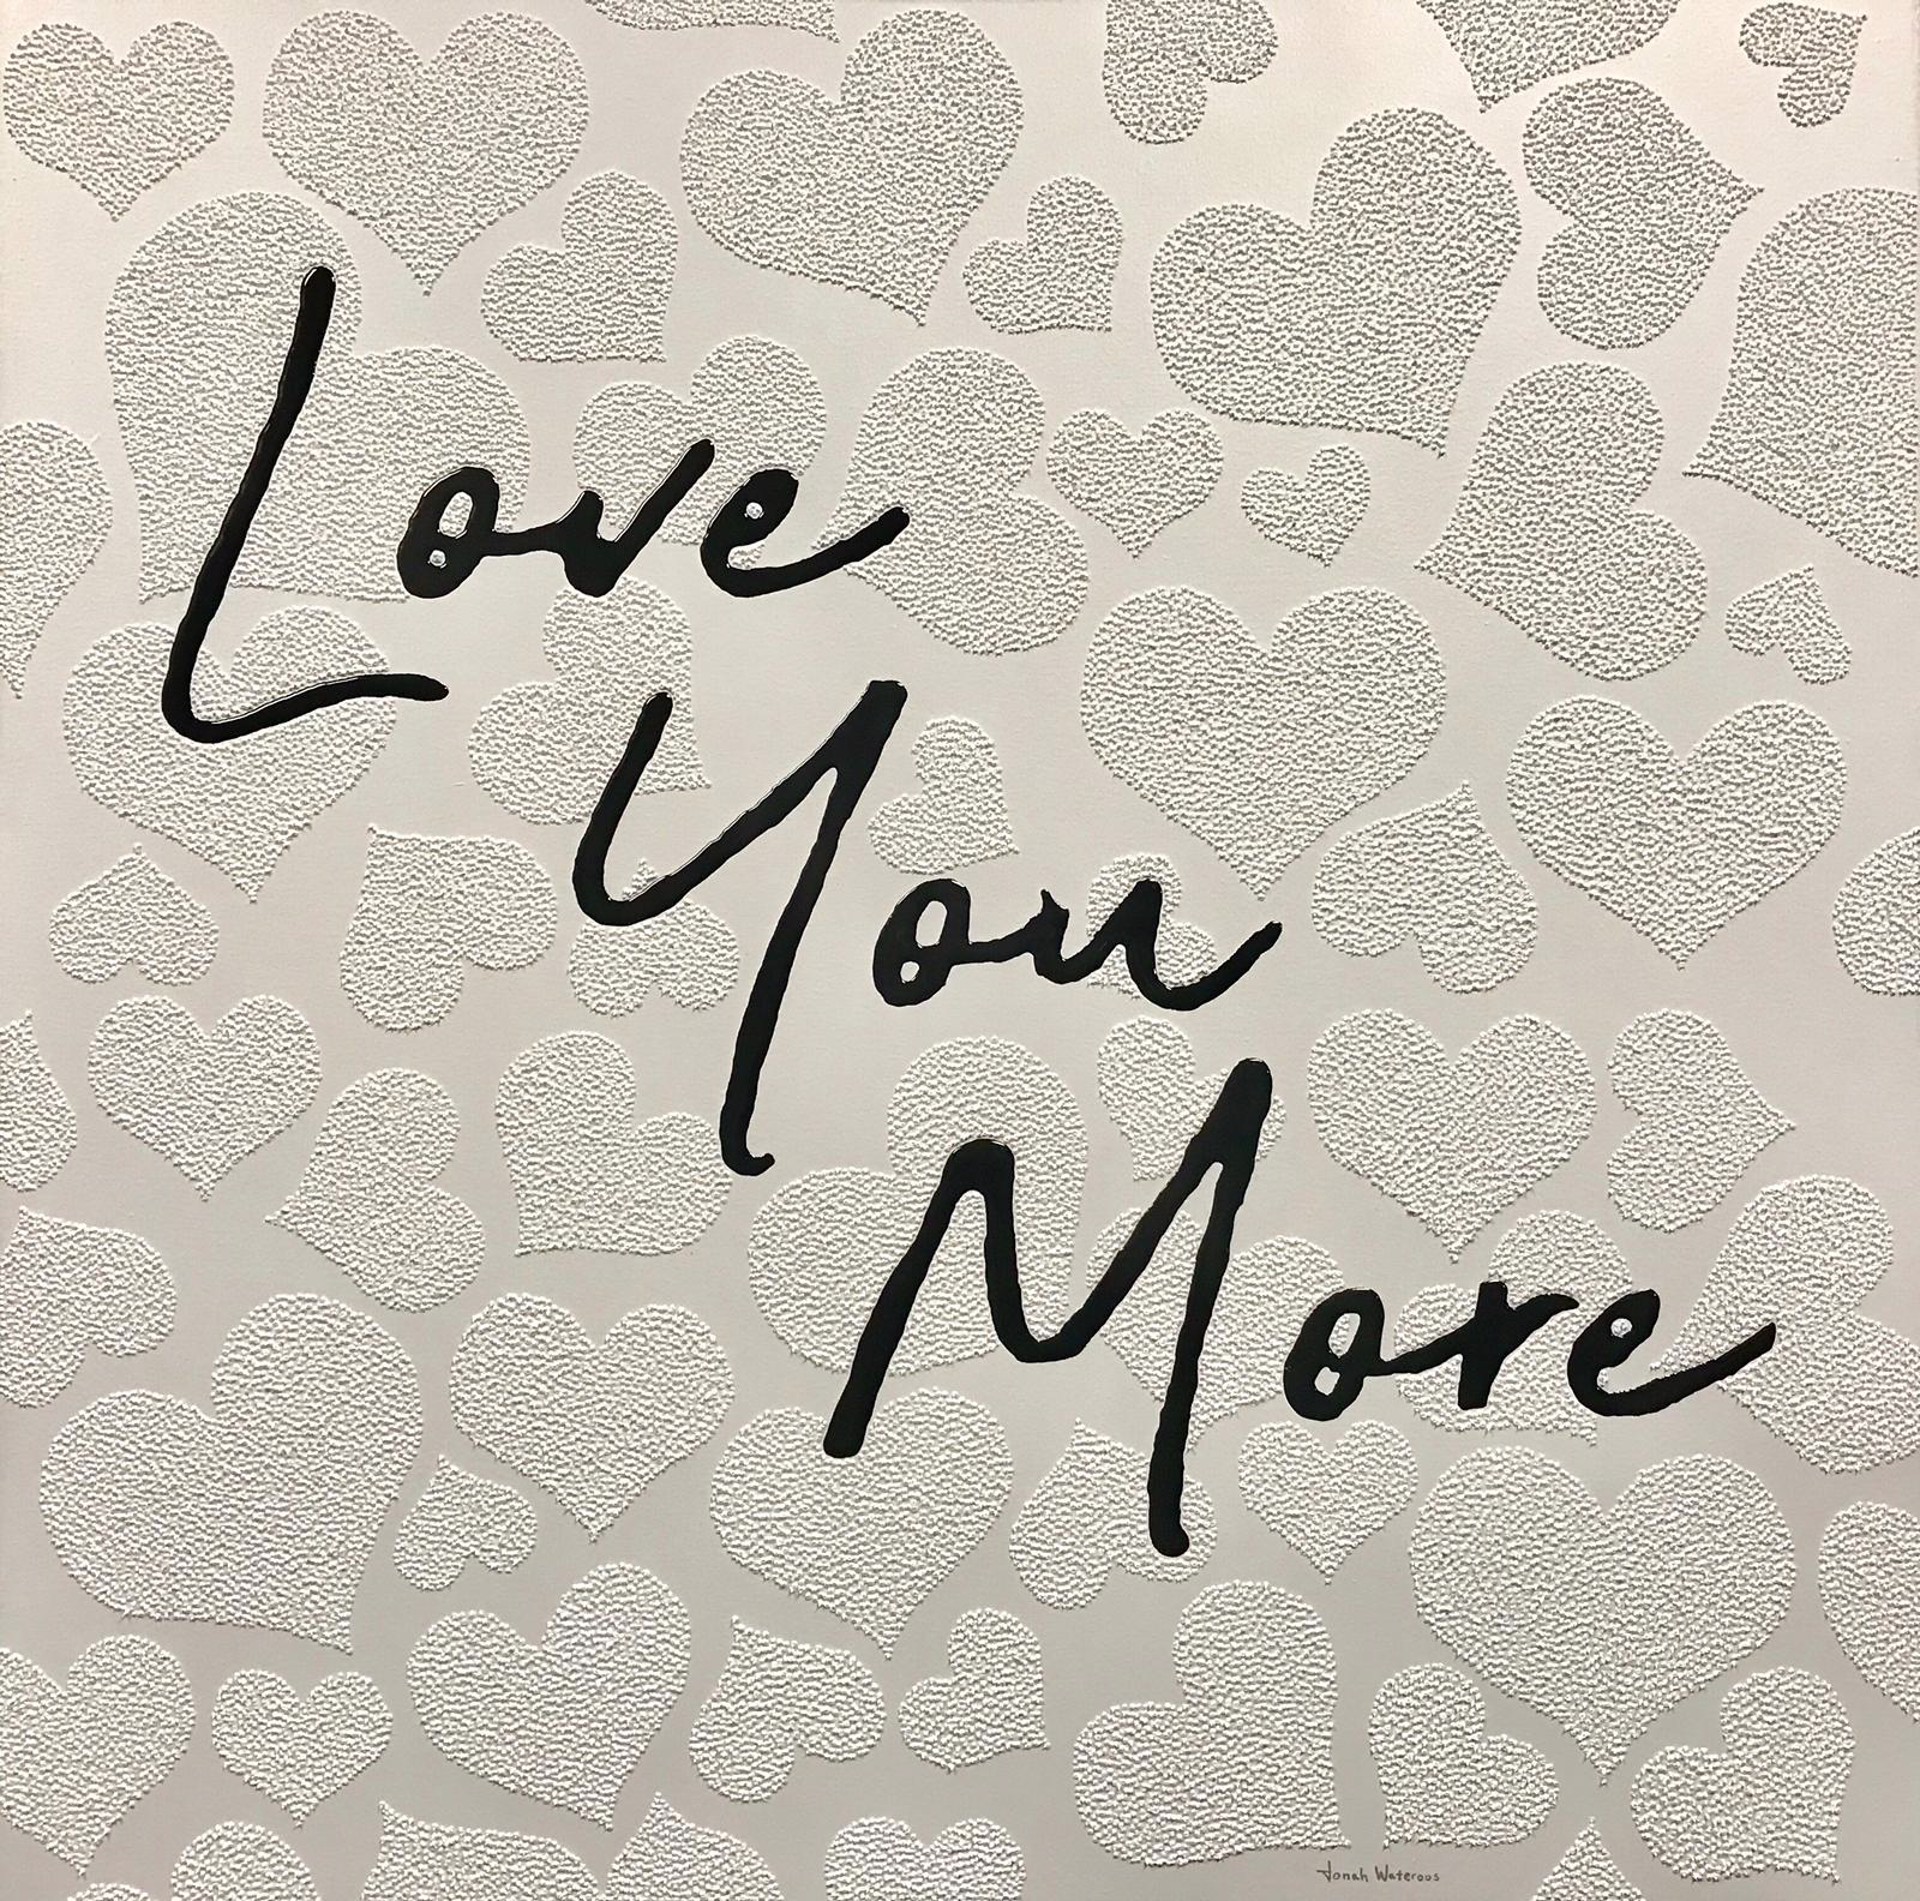 Love you more by Jonah Waterous